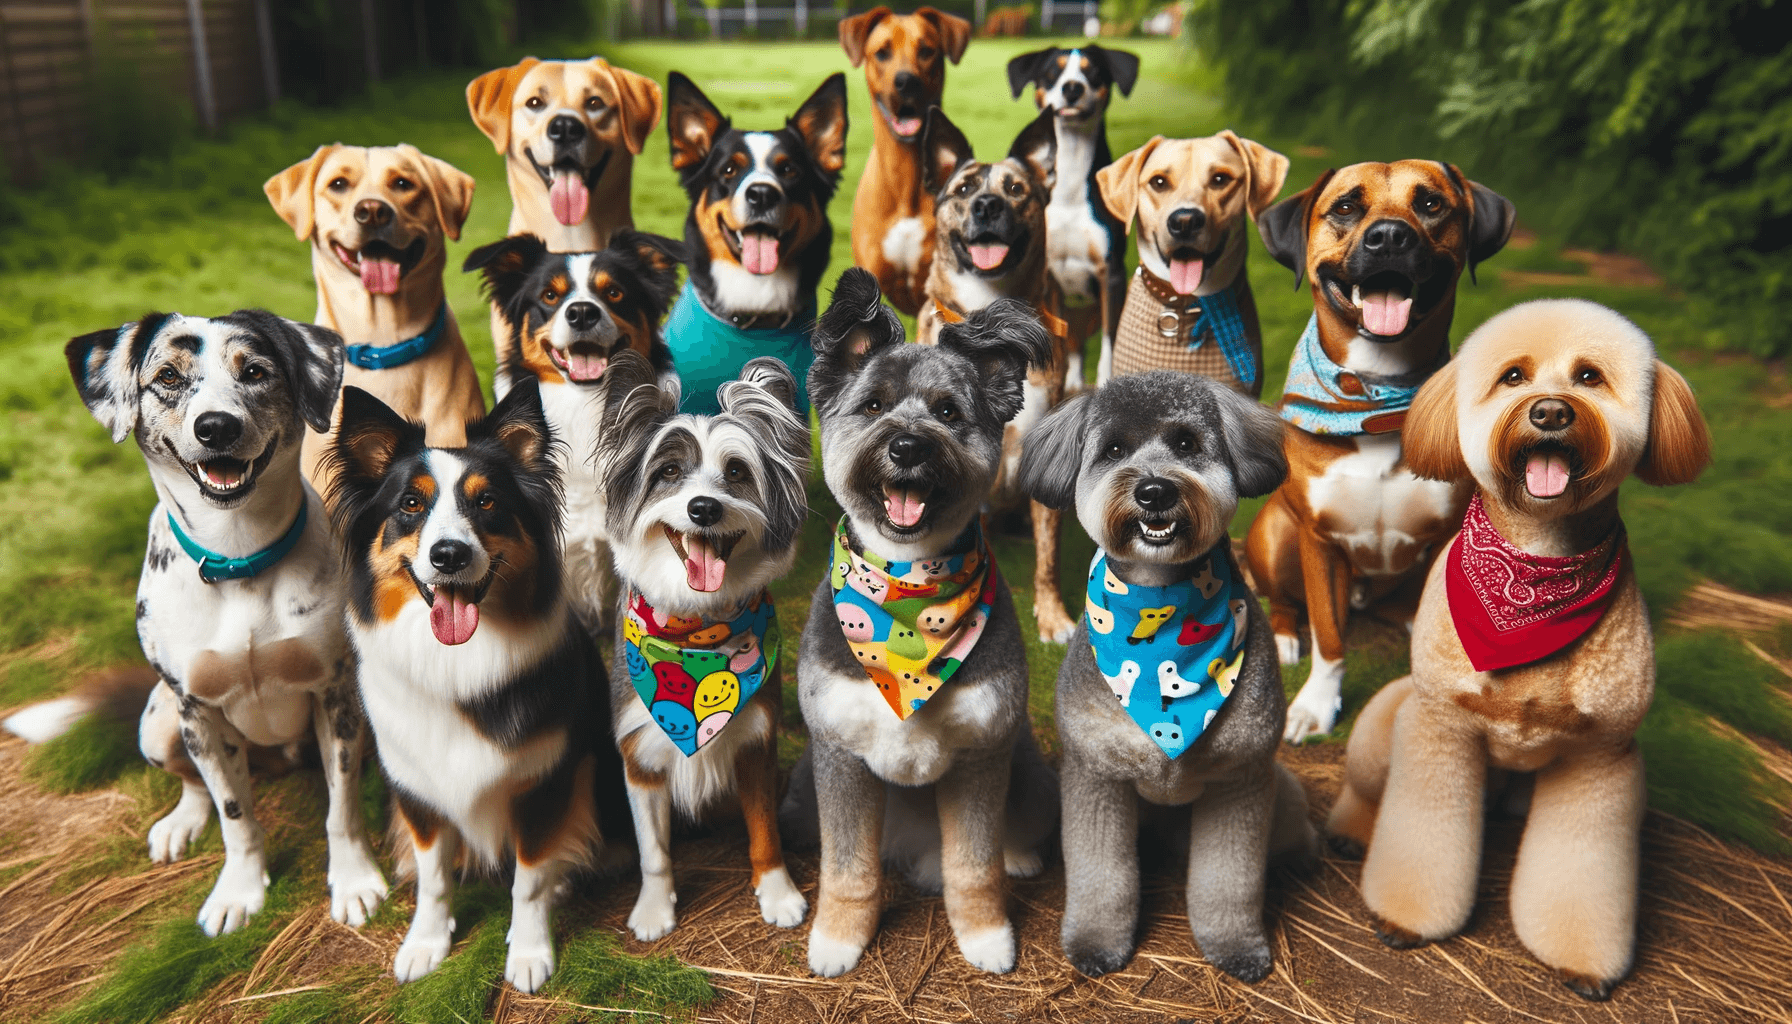 A group of adorable mixed breed dogs hanging out together, showcasing their unique styles